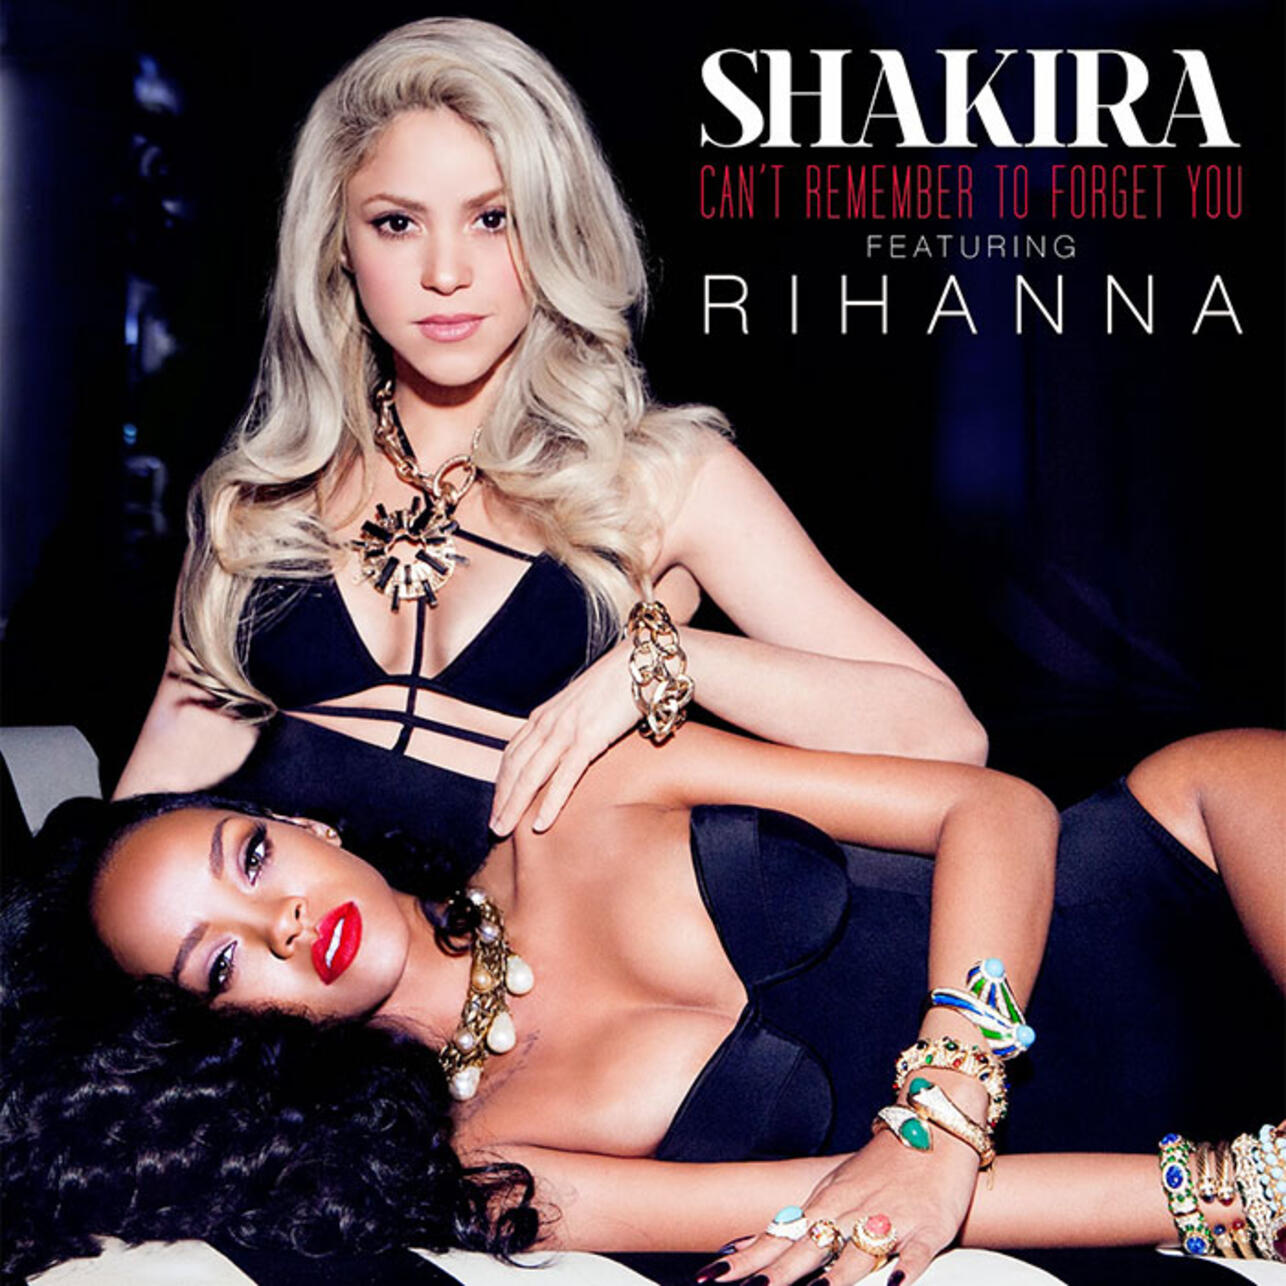     (Rihanna)   (Shakira)   Can't Remember To Forget You